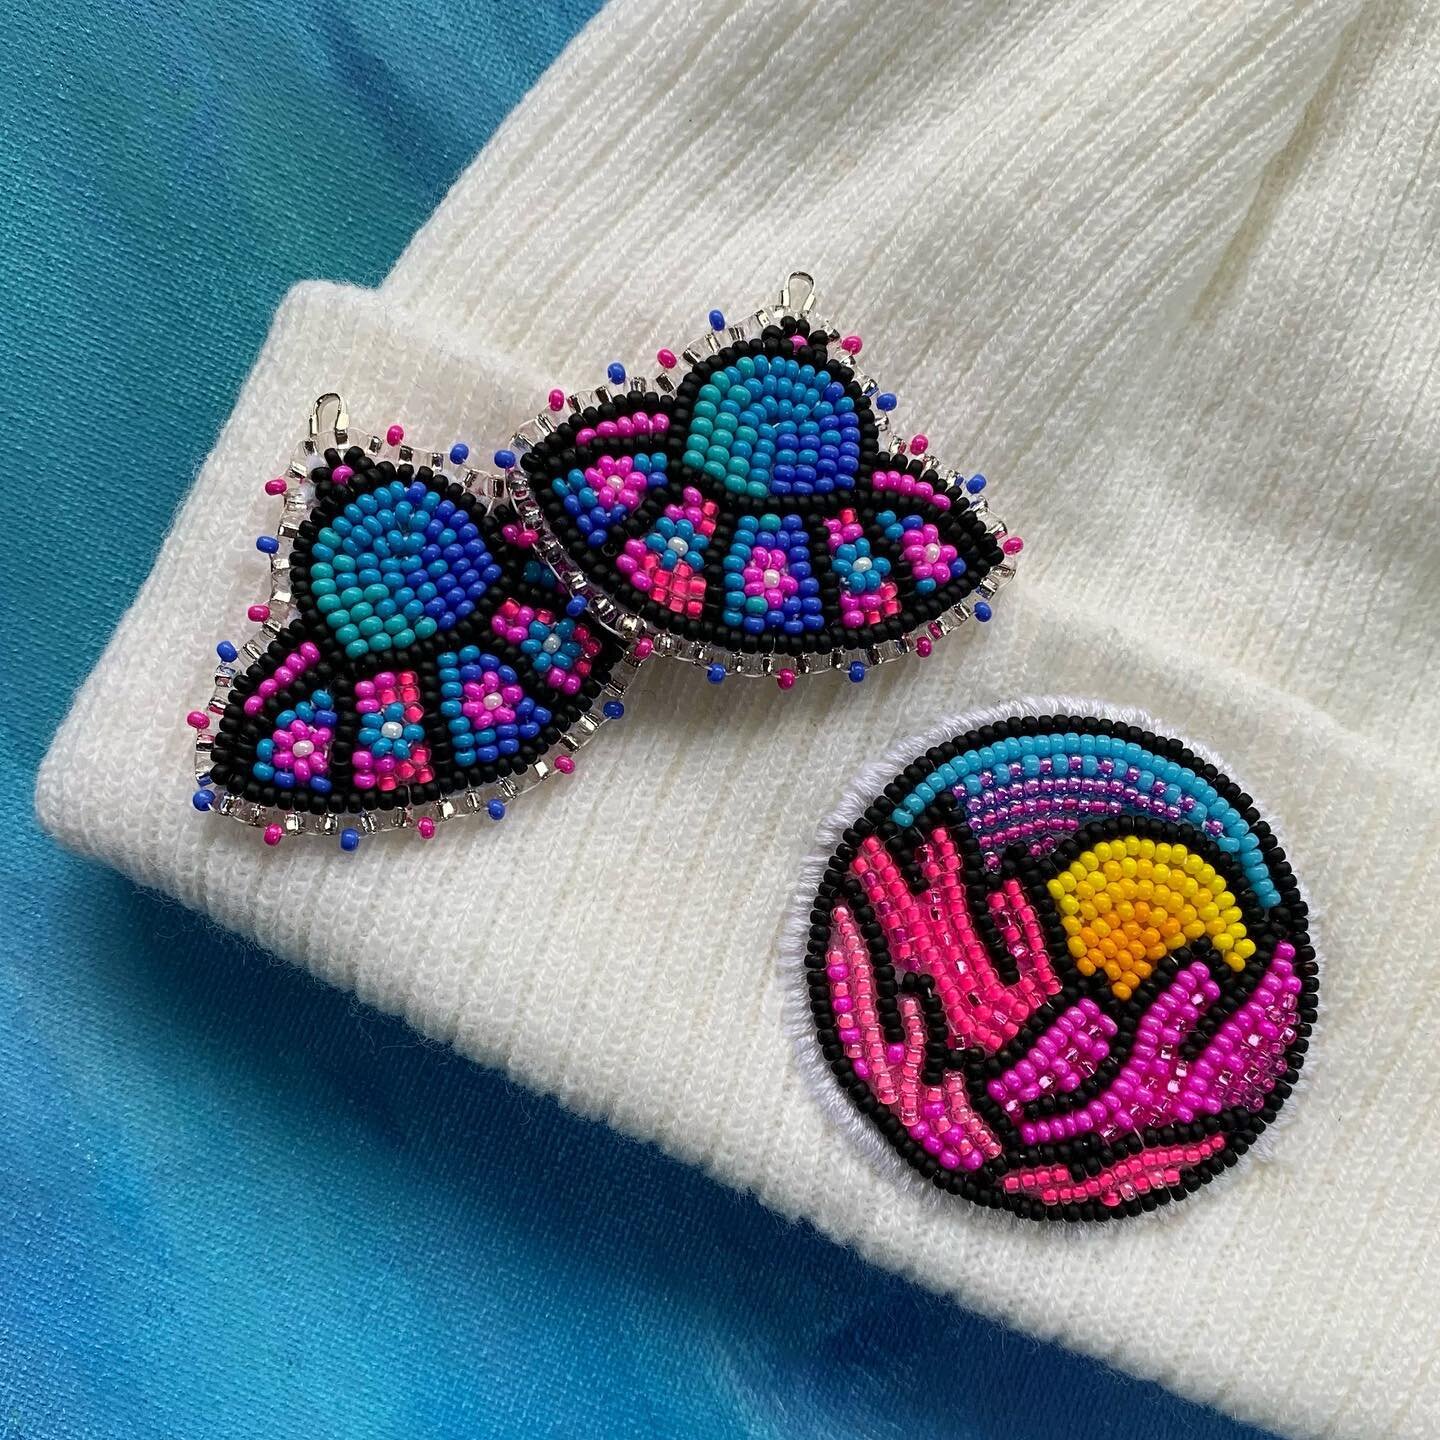 Bead me up 🛸💕🌄

Just a couple separate orders I thought looked really sweet together 🥰💕

#beadwork #beadembroidery #beadedearrings #customorder #handmadejewelry #beanies #ufo #floral #mountains #landscape #beadedjewelry #beadworks #neons #indige